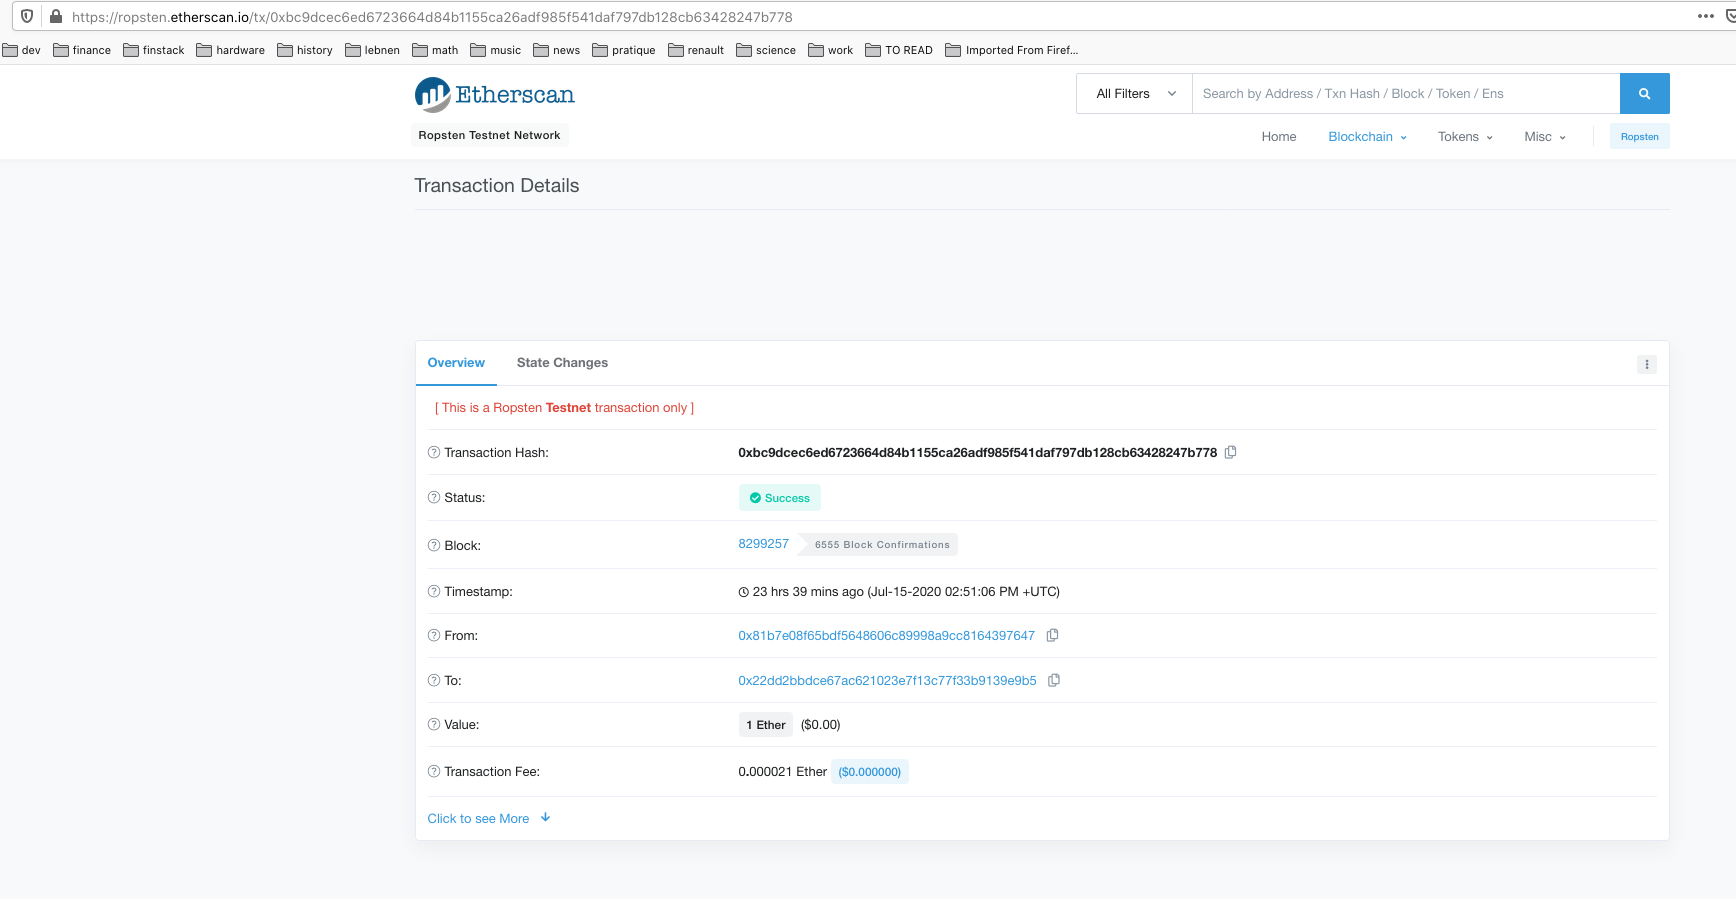 Account Balance Verification in Etherscan